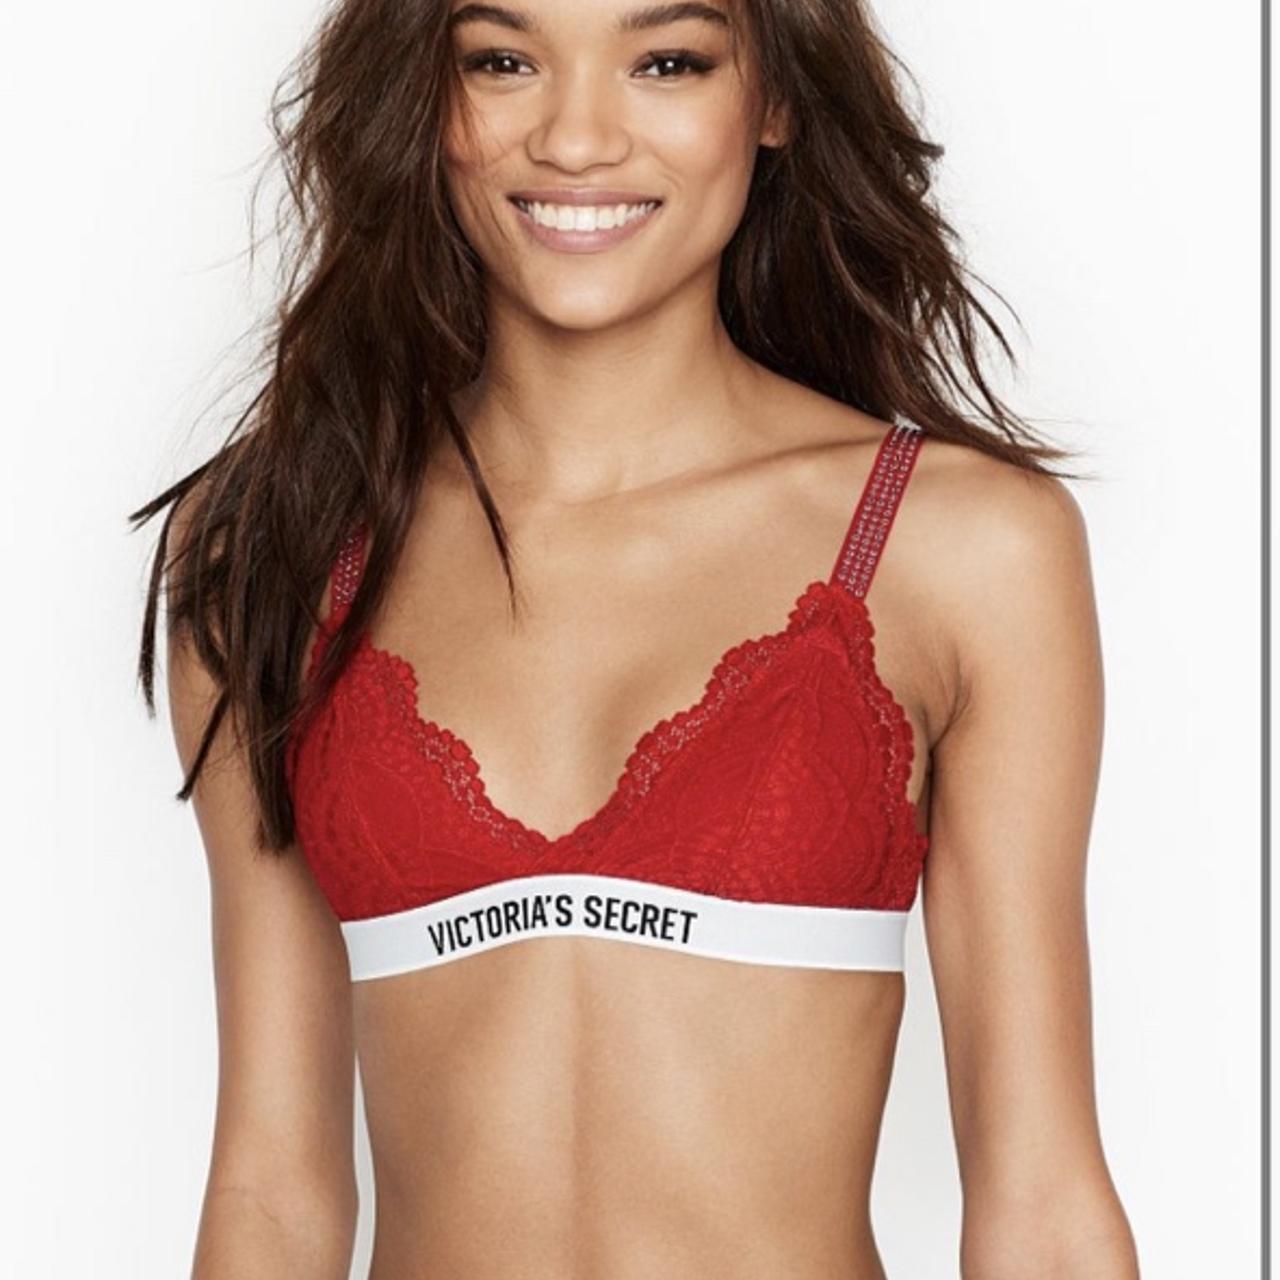 Potentially NSFW) Victoria's Secret Bralette and Sexy Shortie Sale